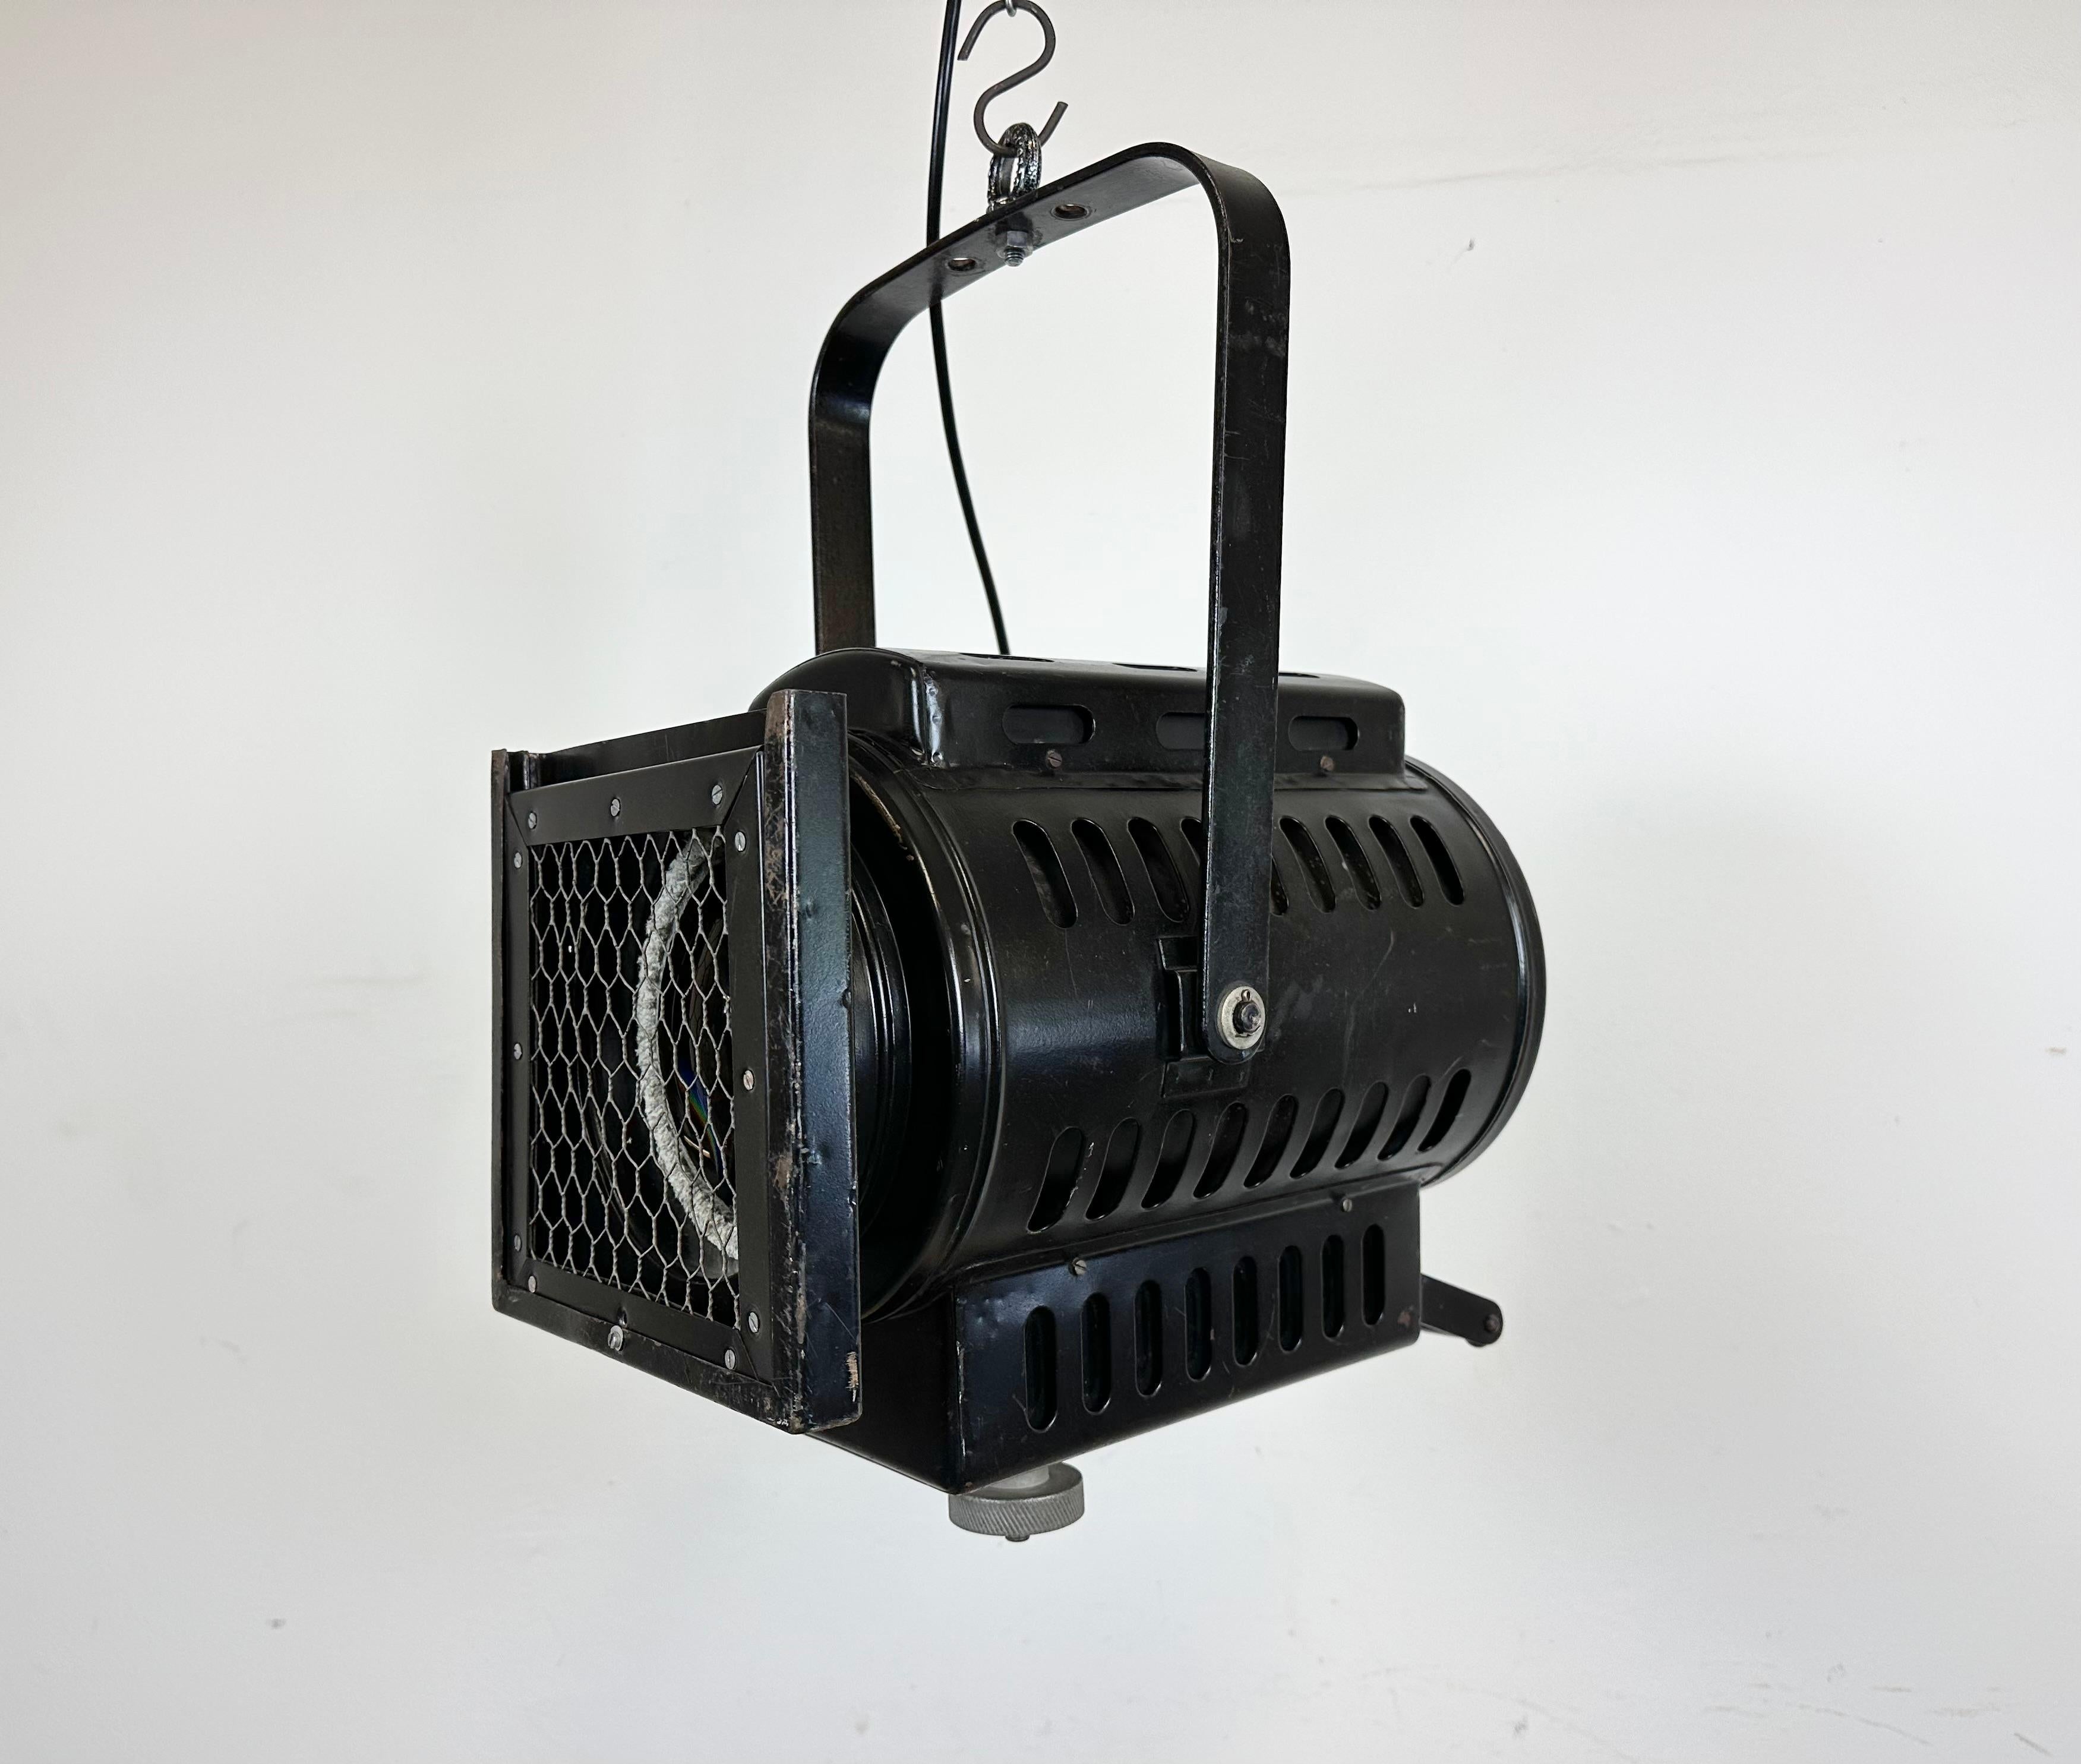 - Vintage theatre spotlight made in former Czechoslovakia during the 1960s 
- It features a black metal body and clear glass lens cover
- Iron grid
- The porcelain socket requires standard E27/ E26 lightbulbs 
- New wire
-The height of the spotlight